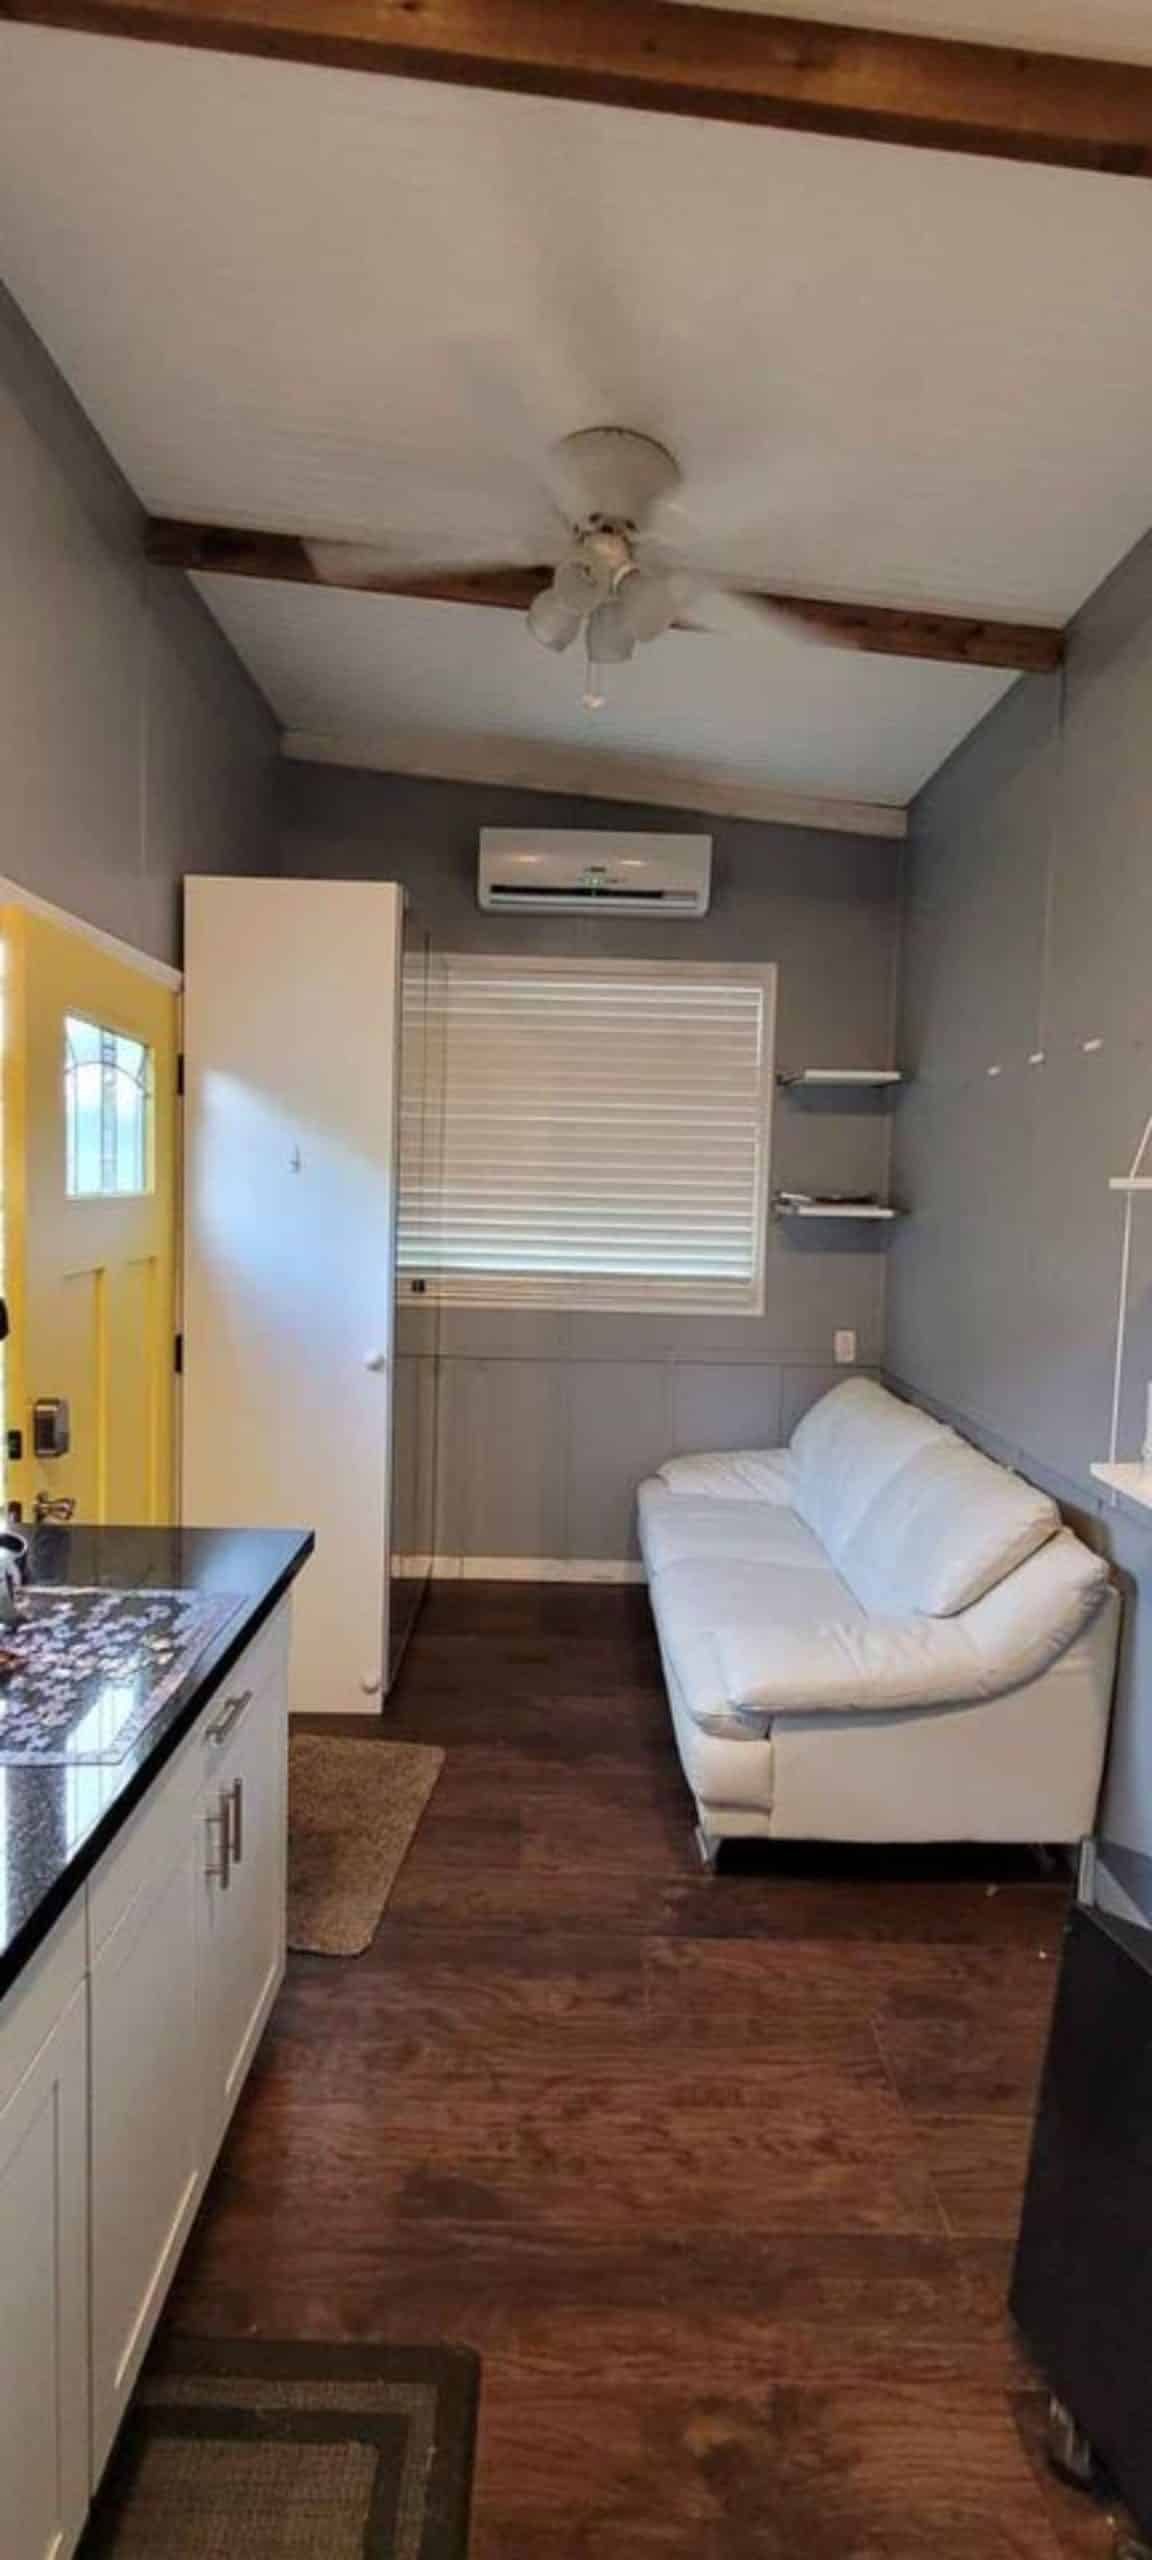 living room of 24' one bedroom tiny house has a very cozy and comfortable couch with air condition unit  